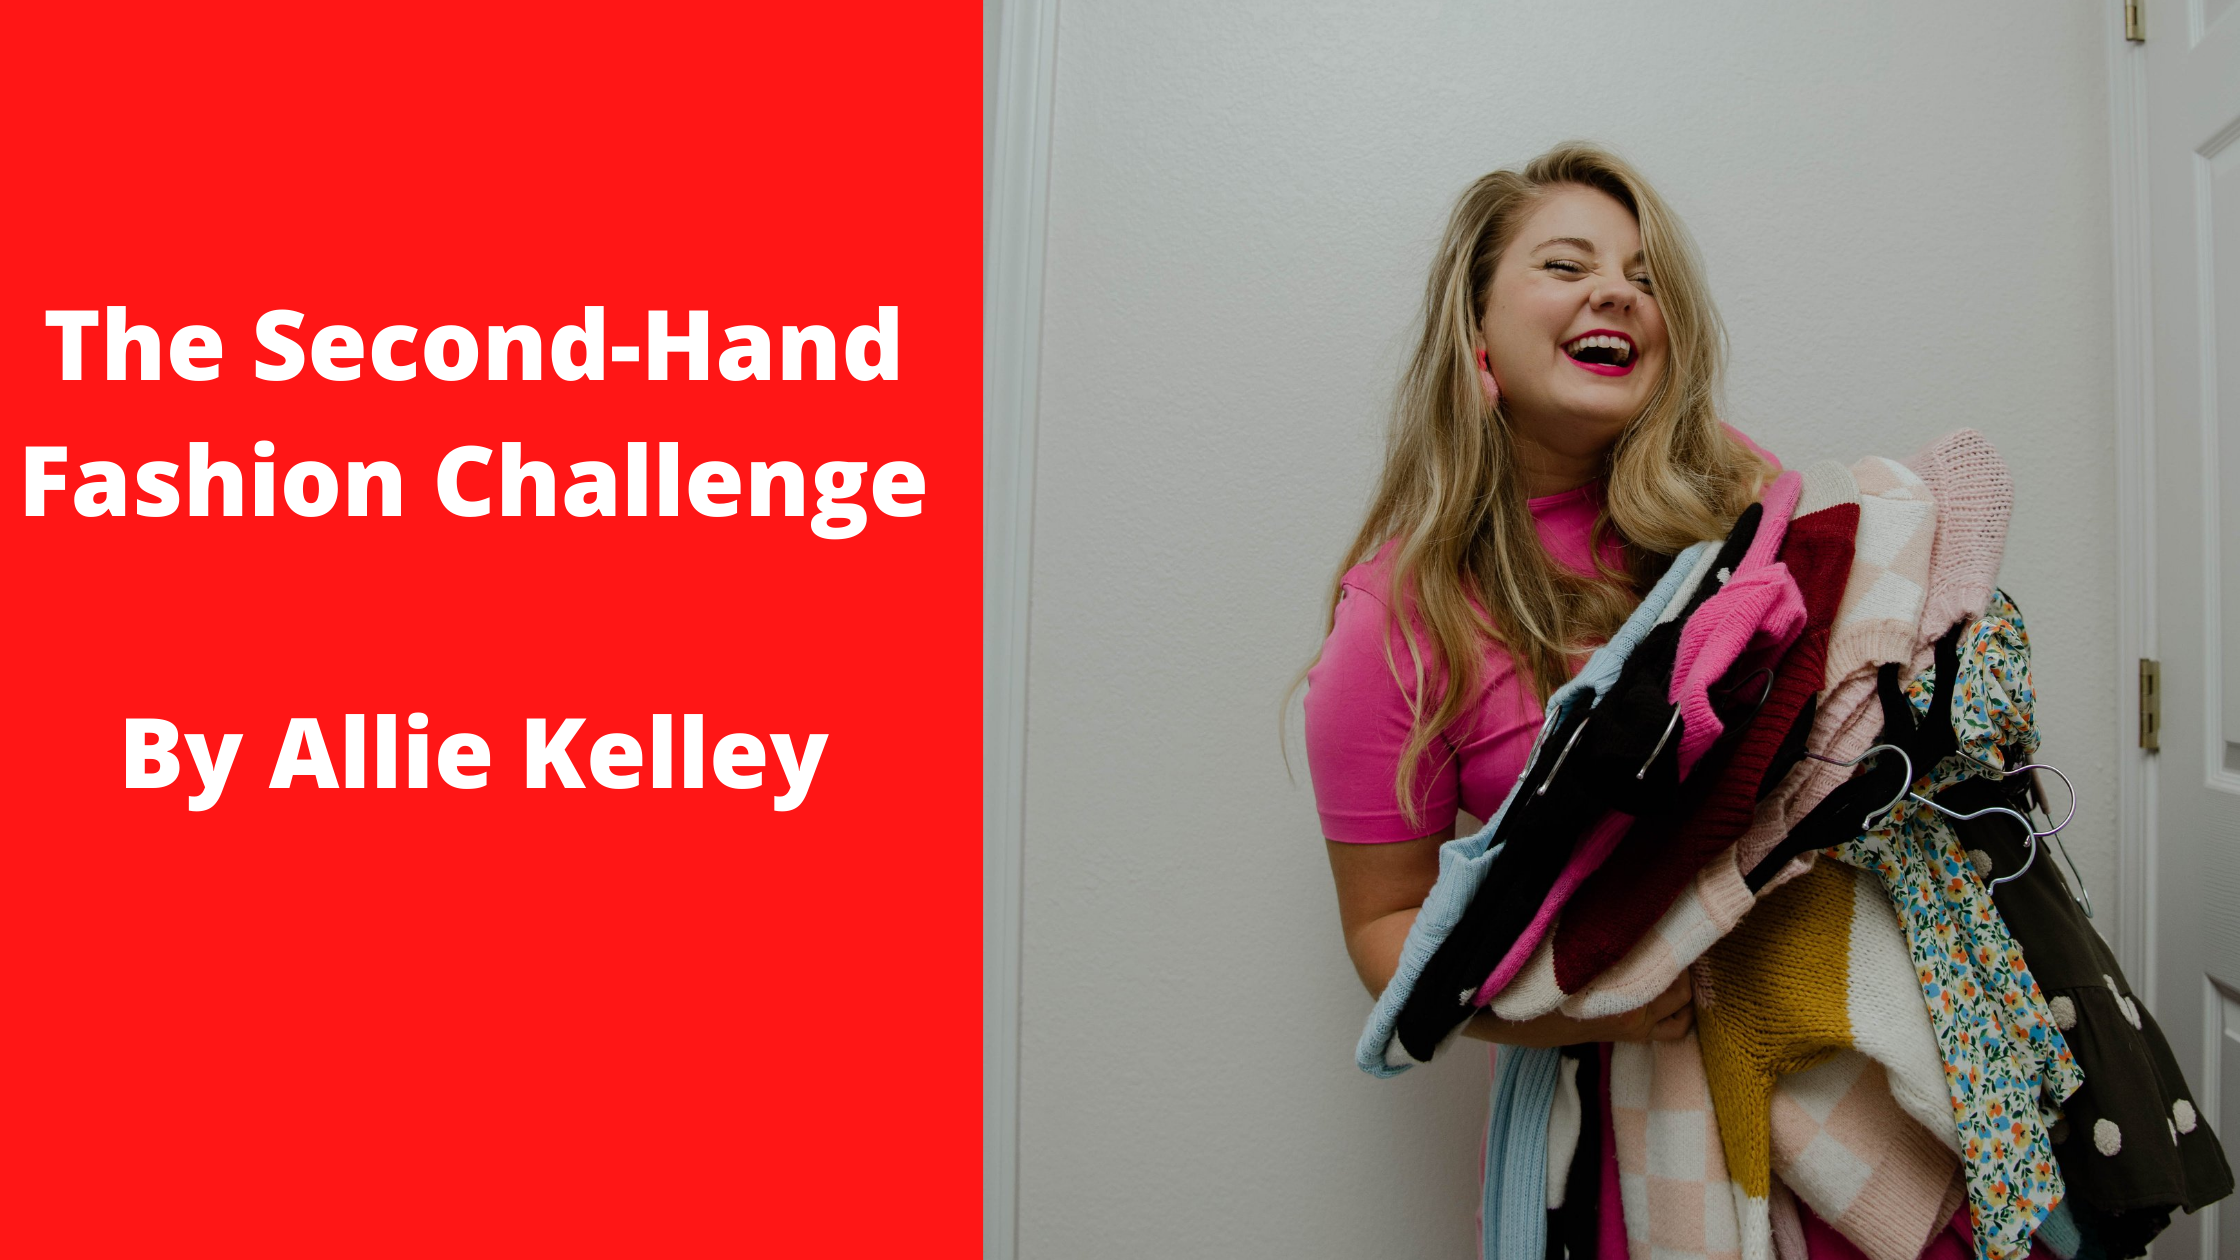 The Second-Hand Fashion Challenge